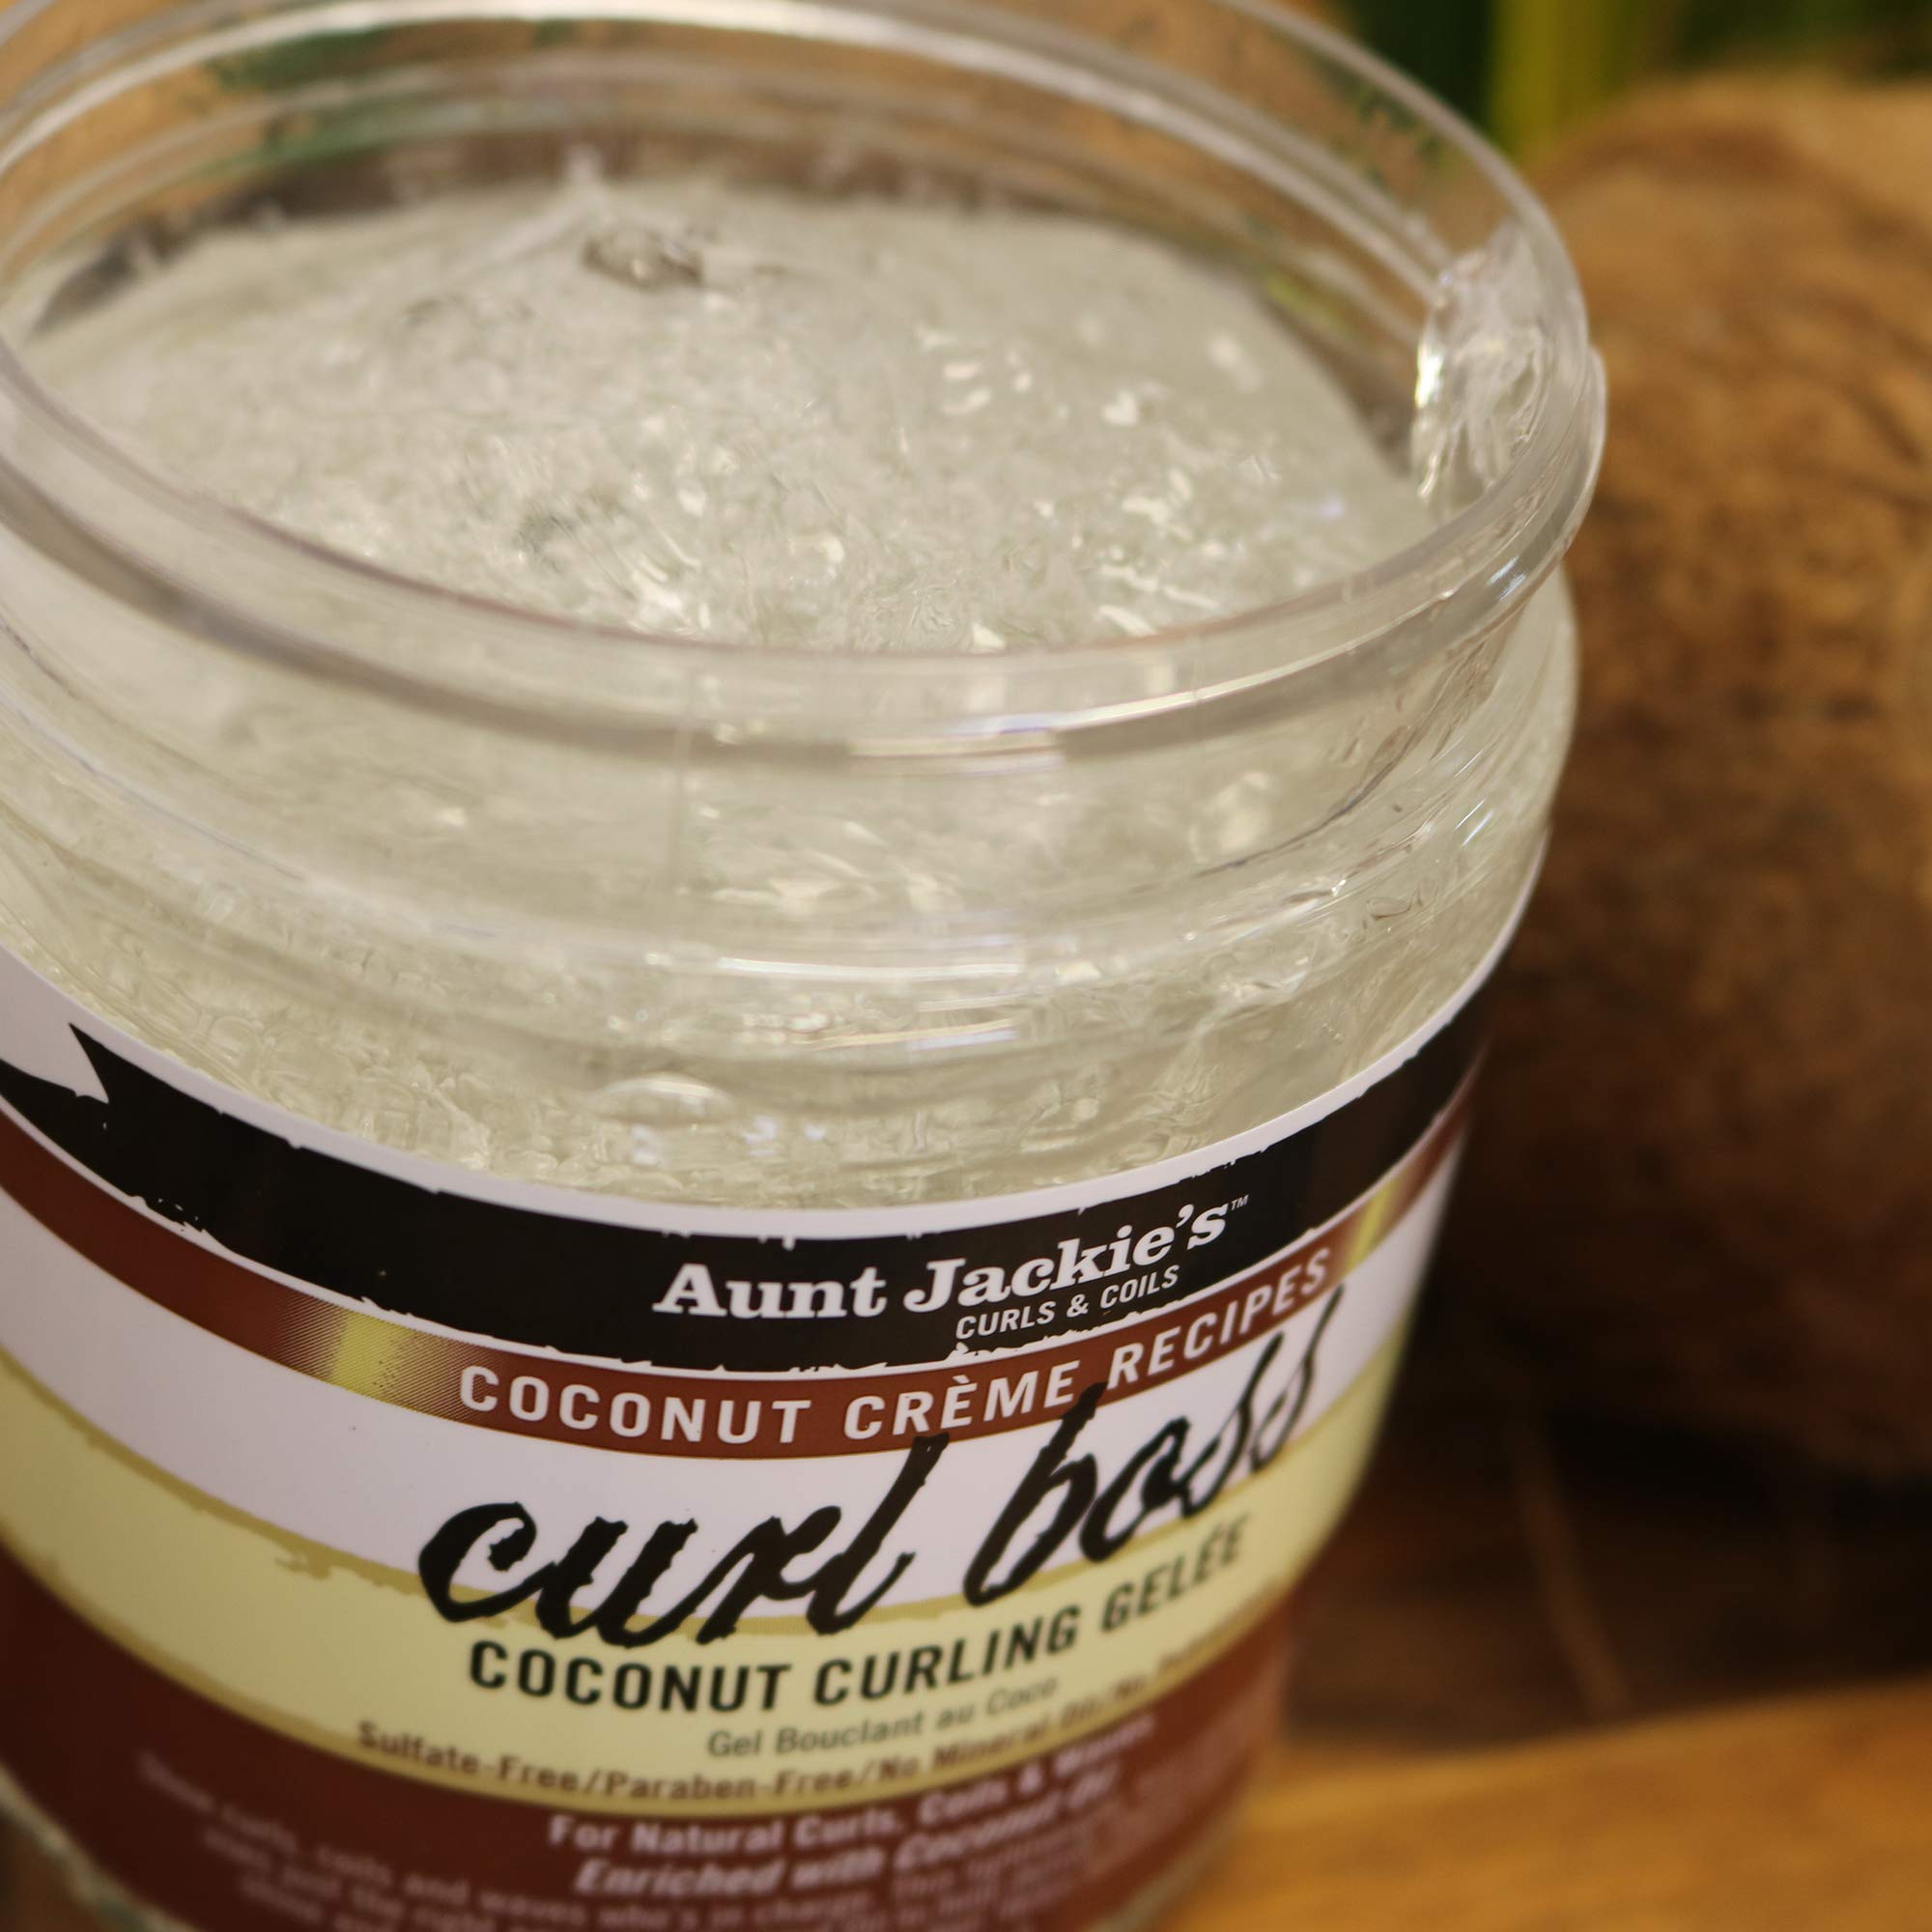 Aunt Jackie's Coconut Crème Recipes Curl Boss Coconut Curling Hair Gel for Naural Curls, Coils and Waves, 15 oz